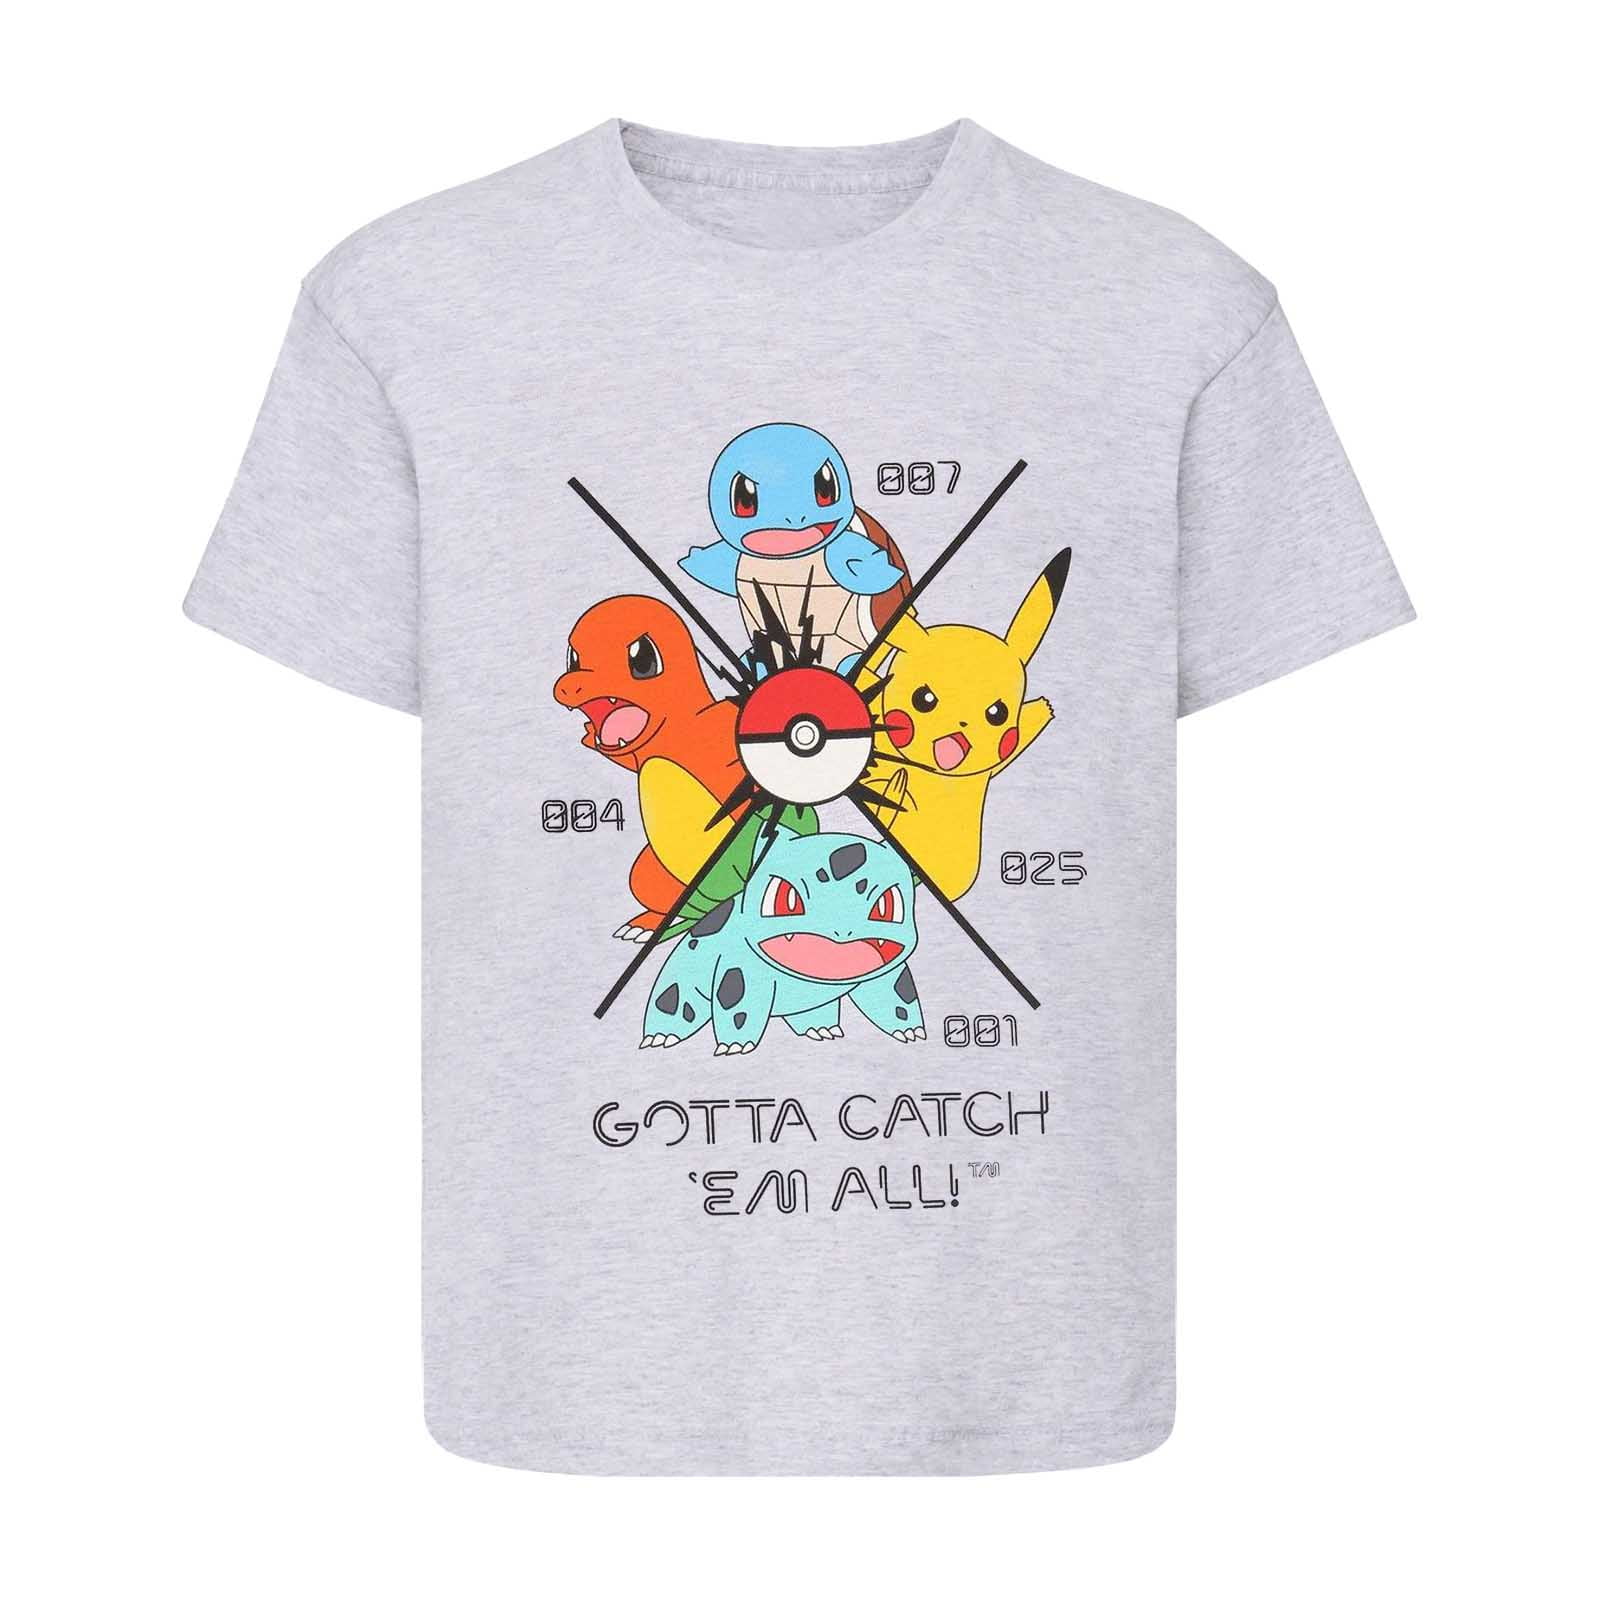 CATCH A POKEMON PERSONALISED CHILDS T-SHIRT 